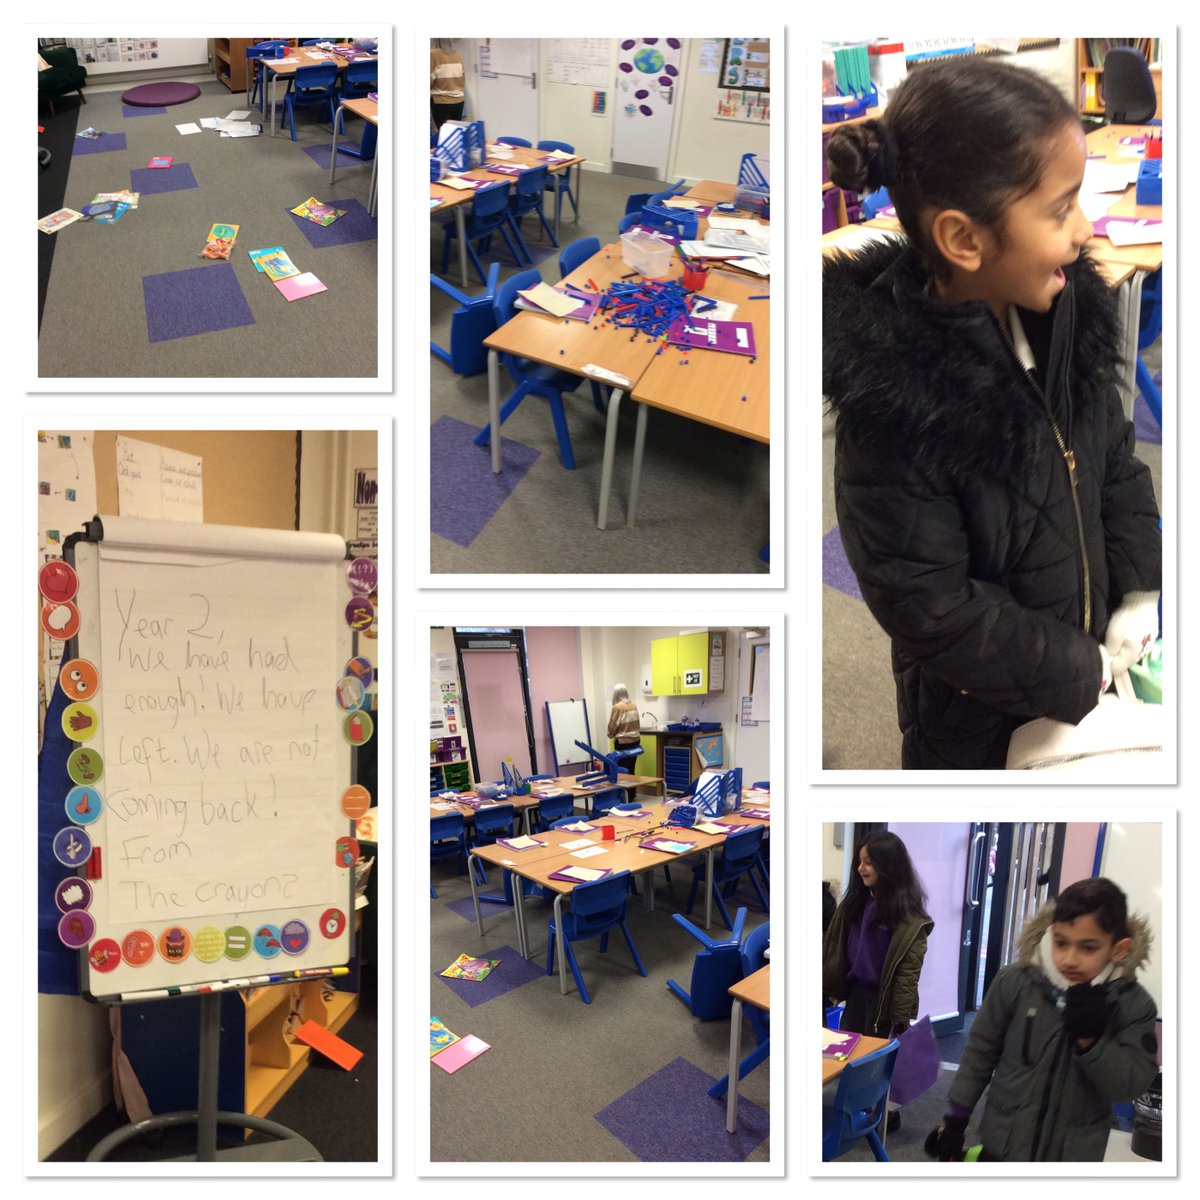 Today Class 2 walked into class to find it in a mess. The crayons were angry with how we treated them and quit! We are going to learn how to write a persuasive letter to get our crayons back